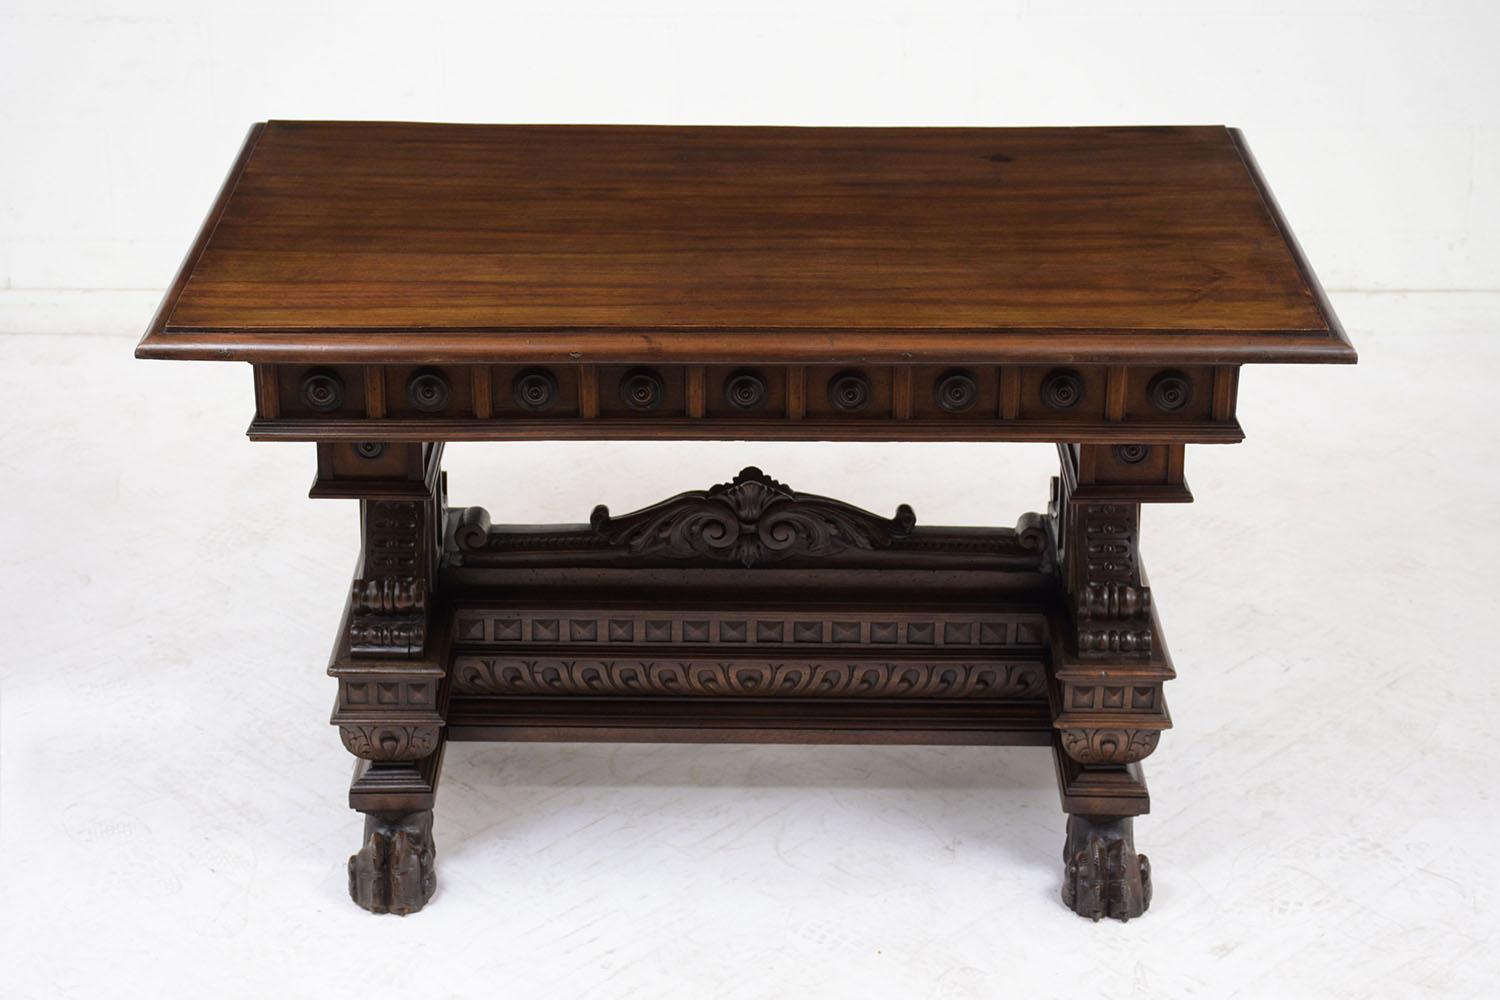 This Antique Italian Renaissance Style Library Table is made out of walnut wood stained in deep walnut color with a polished finish and has been fully restored. The writing table features handcrafted architectural designs accented by scrolls,